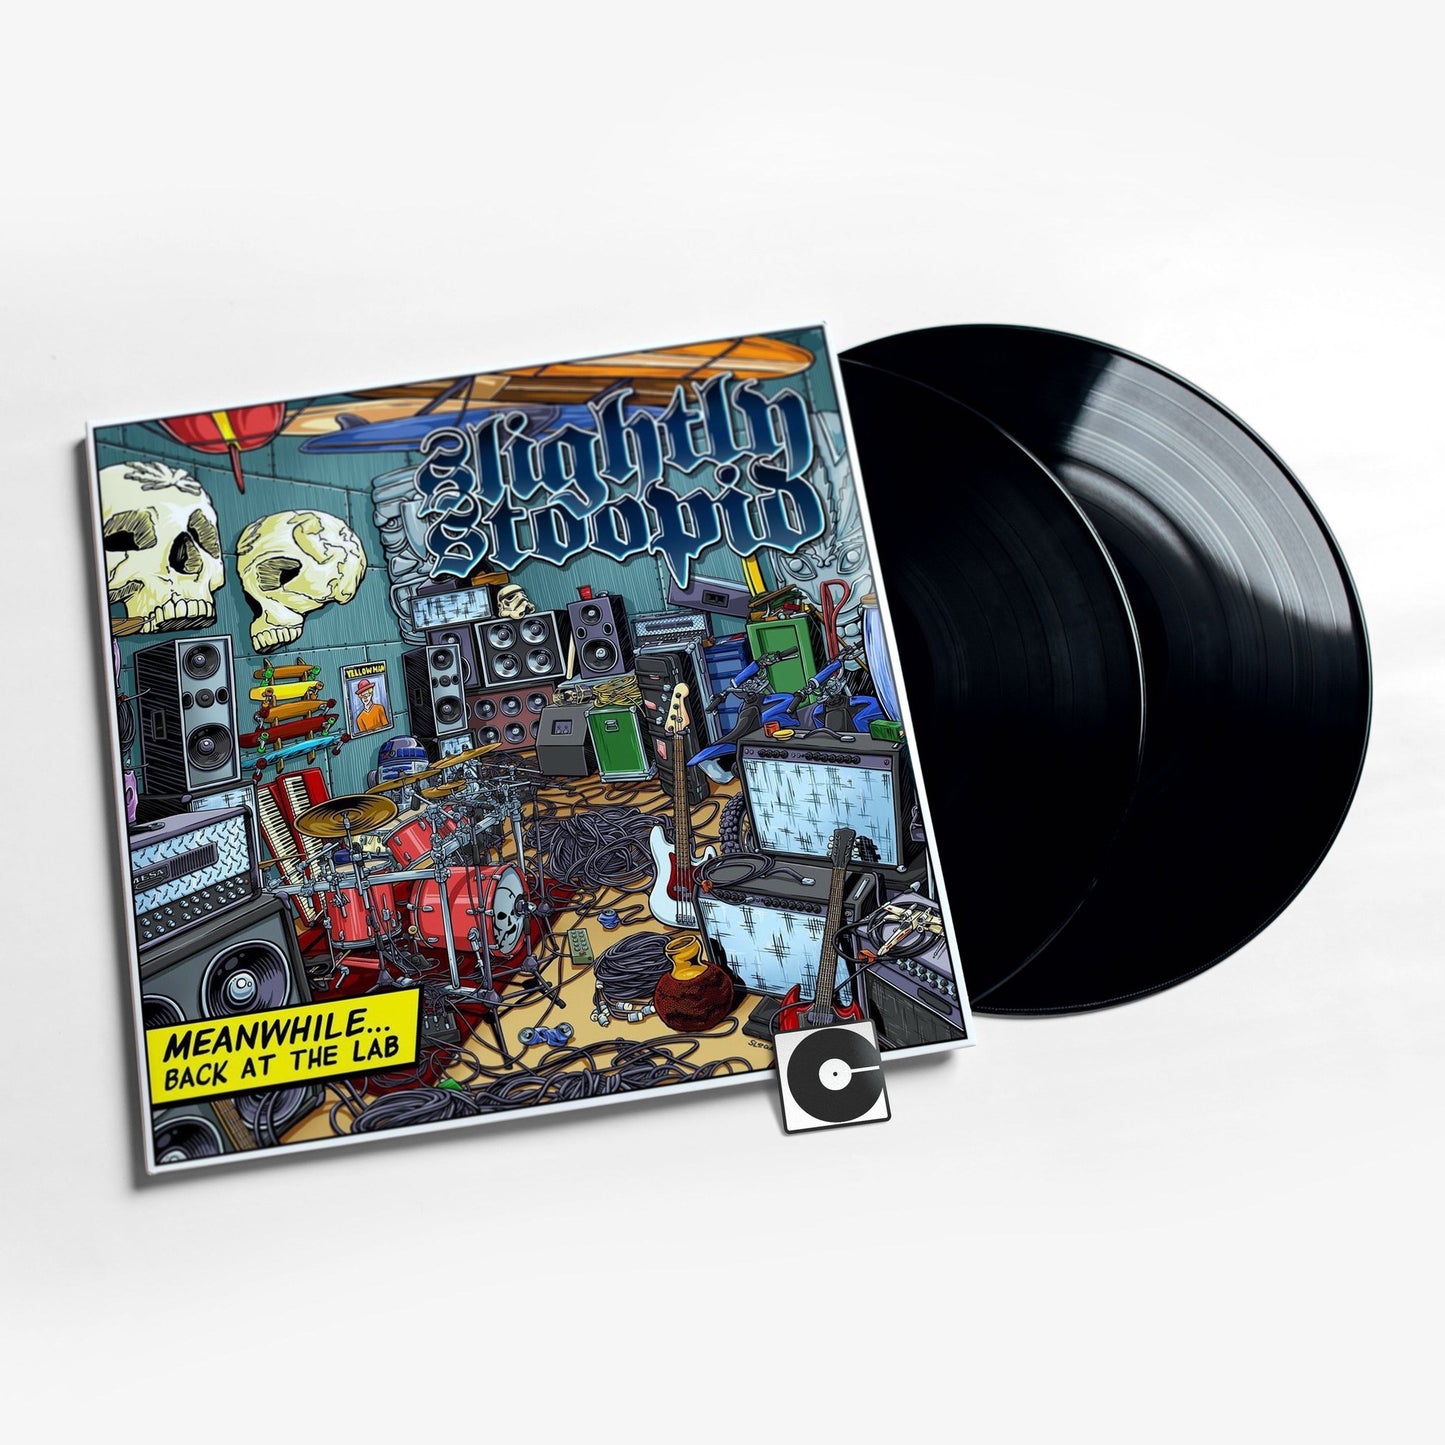 Slightly Stoopid - "Meanwhile ... Back In The Lab"